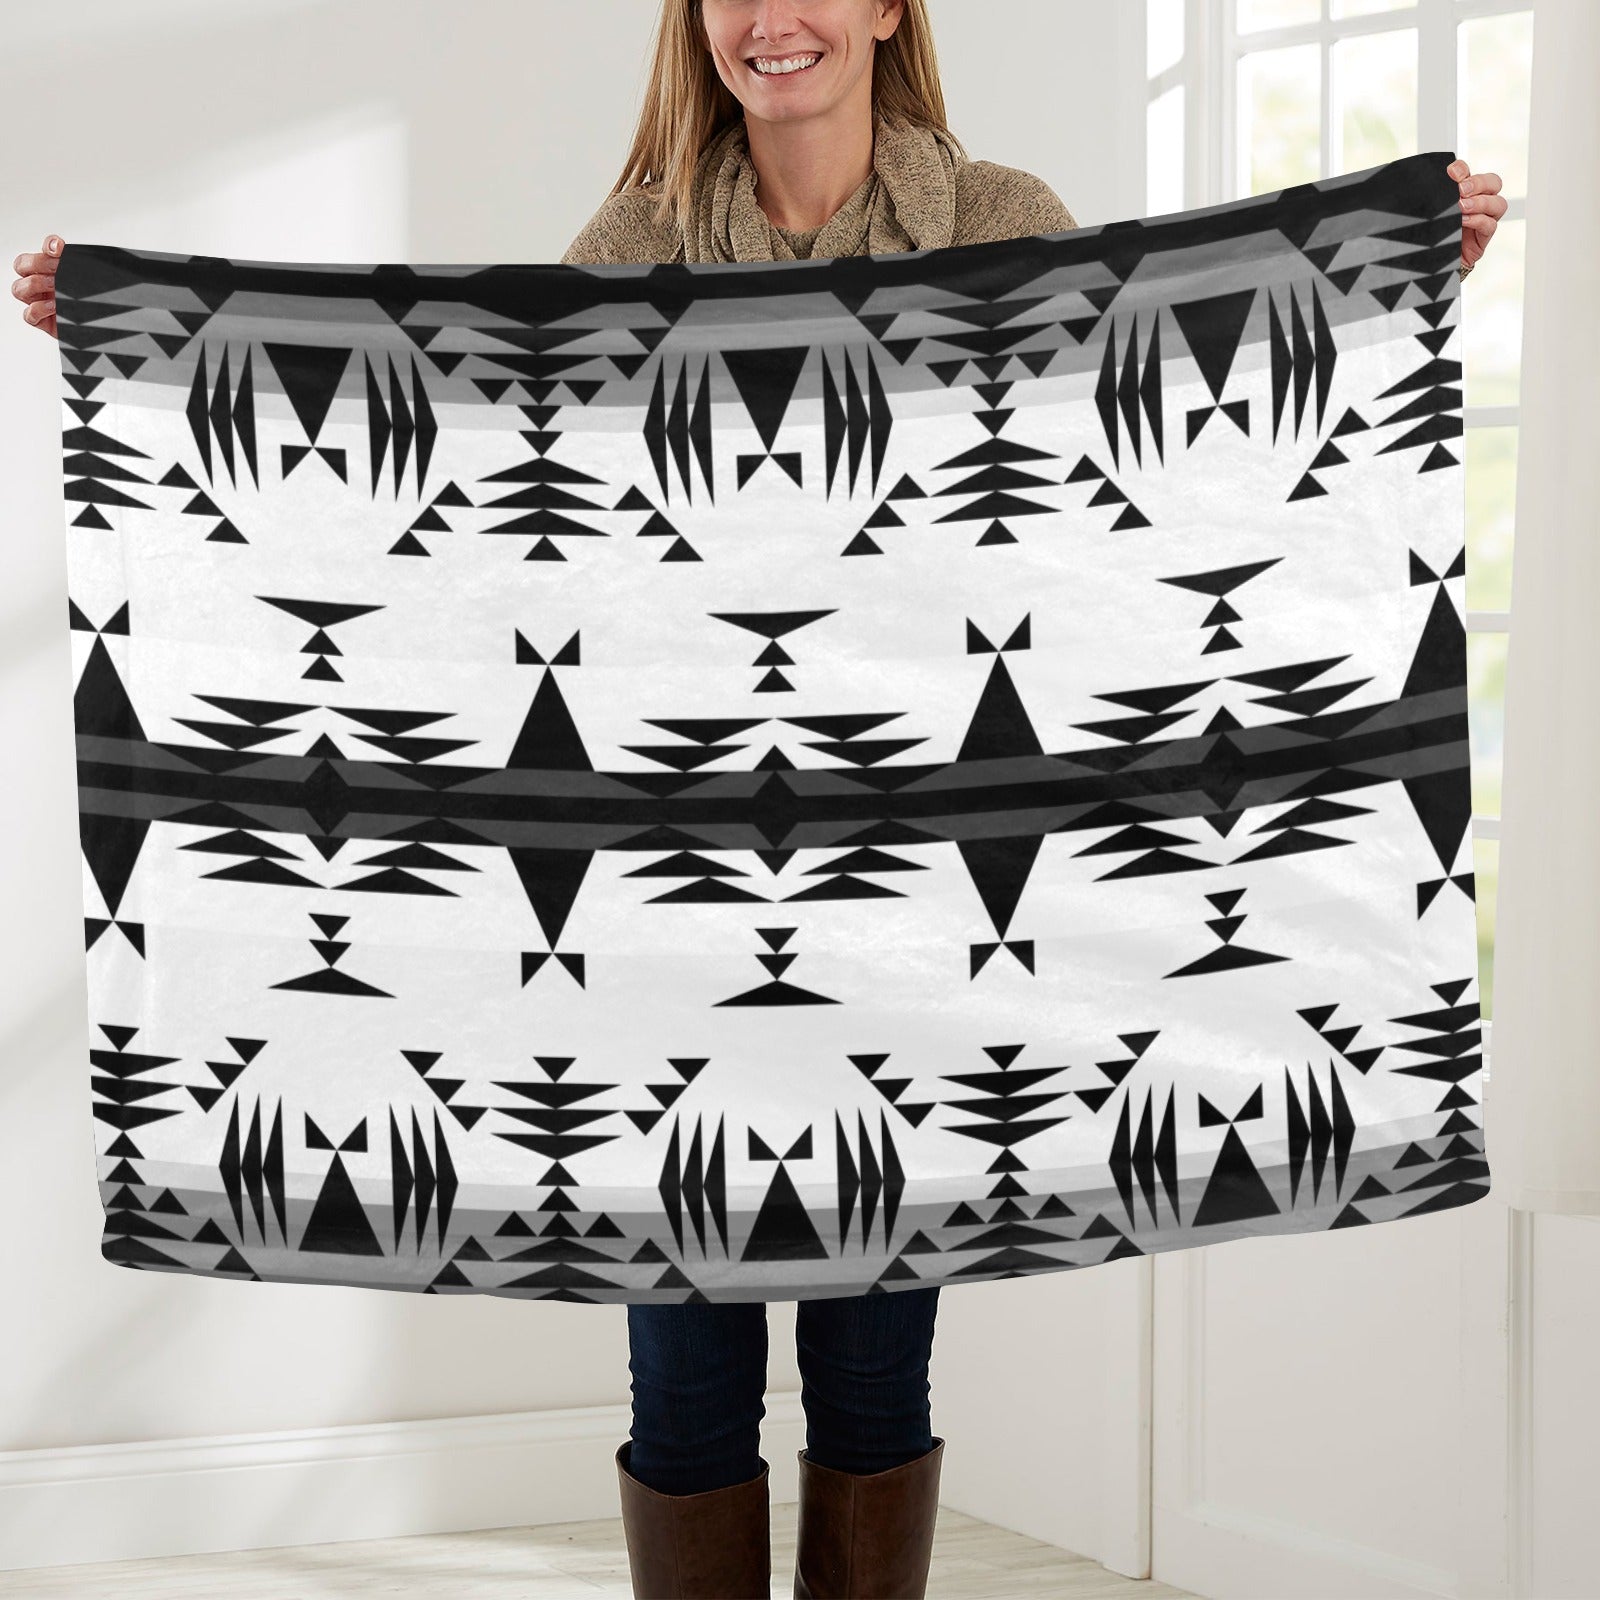 Between the Mountains White and Black Baby Blanket 40"x50" Baby Blanket 40"x50" e-joyer 